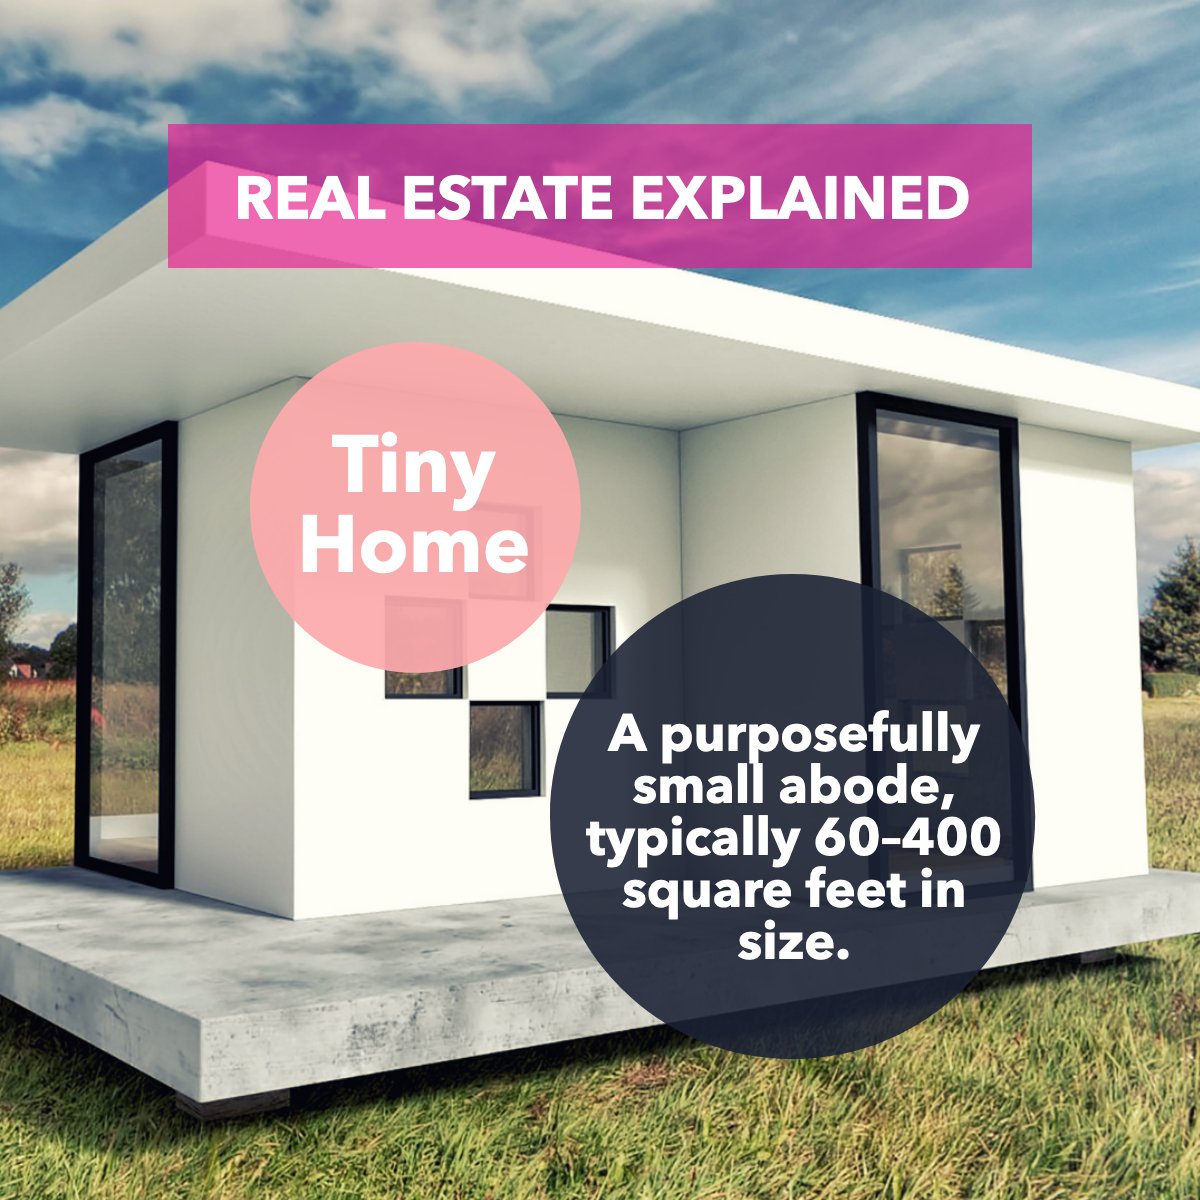 Did you know what a Tiny Home is? 🏡

Let us know below!

#tinyhomes #tinylovelyhome #tinyhomestyle 
 #homesales